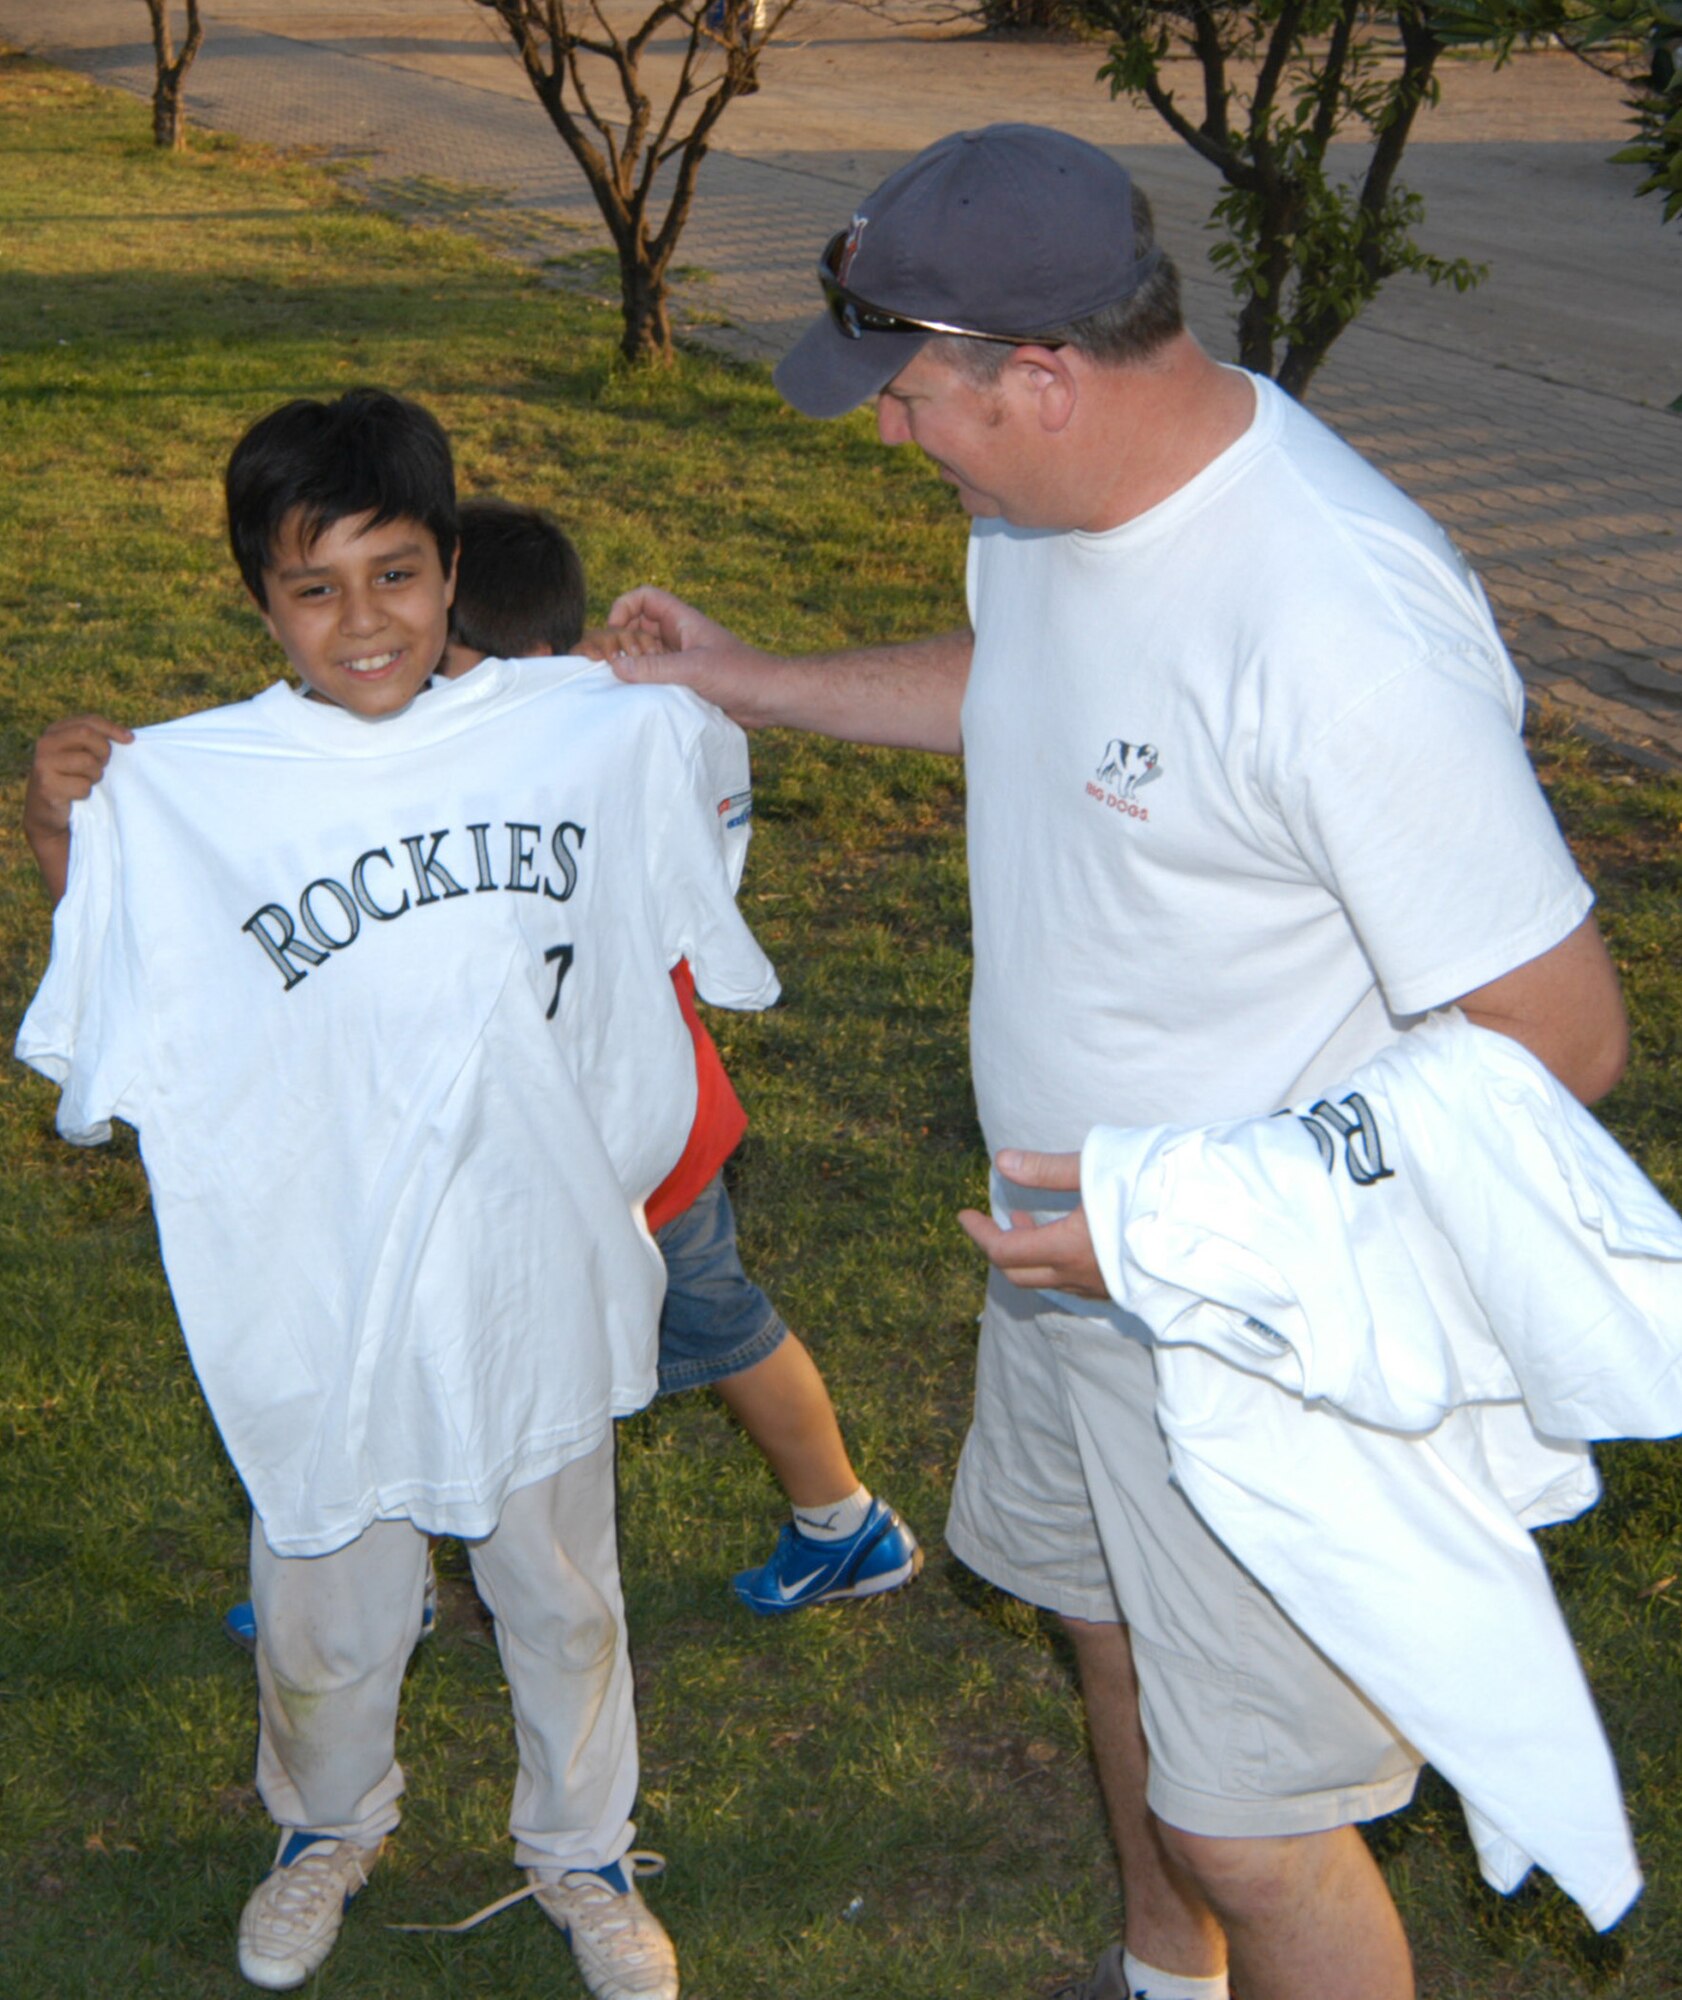 Airmen assigned to Davis-Monthan Air Force Base, Ariz., hand out Colorado Rockies tee shirts and backpacks to the children of Santiago, Chile. The Airmen and U.S. Air Force aircraft were part of FIDAE 2008, one of the largest combined air and trade shows, and for Exercise Newen 2008. The exercise builds the partnership between the U.S. and Chilean militaries. U.S. Airmen got to practice baseball diplomacy as well, in a friendly game that matched them up to the Santiago Metros, a 19-and-under squad filled with semi-pros. The Colorado Rockies donated items for the children, and the Air Force gave away memorabilia, as well as the game, to their opponents. (U.S. Air Force photo/Master Sgt. Jason Tudor)                                